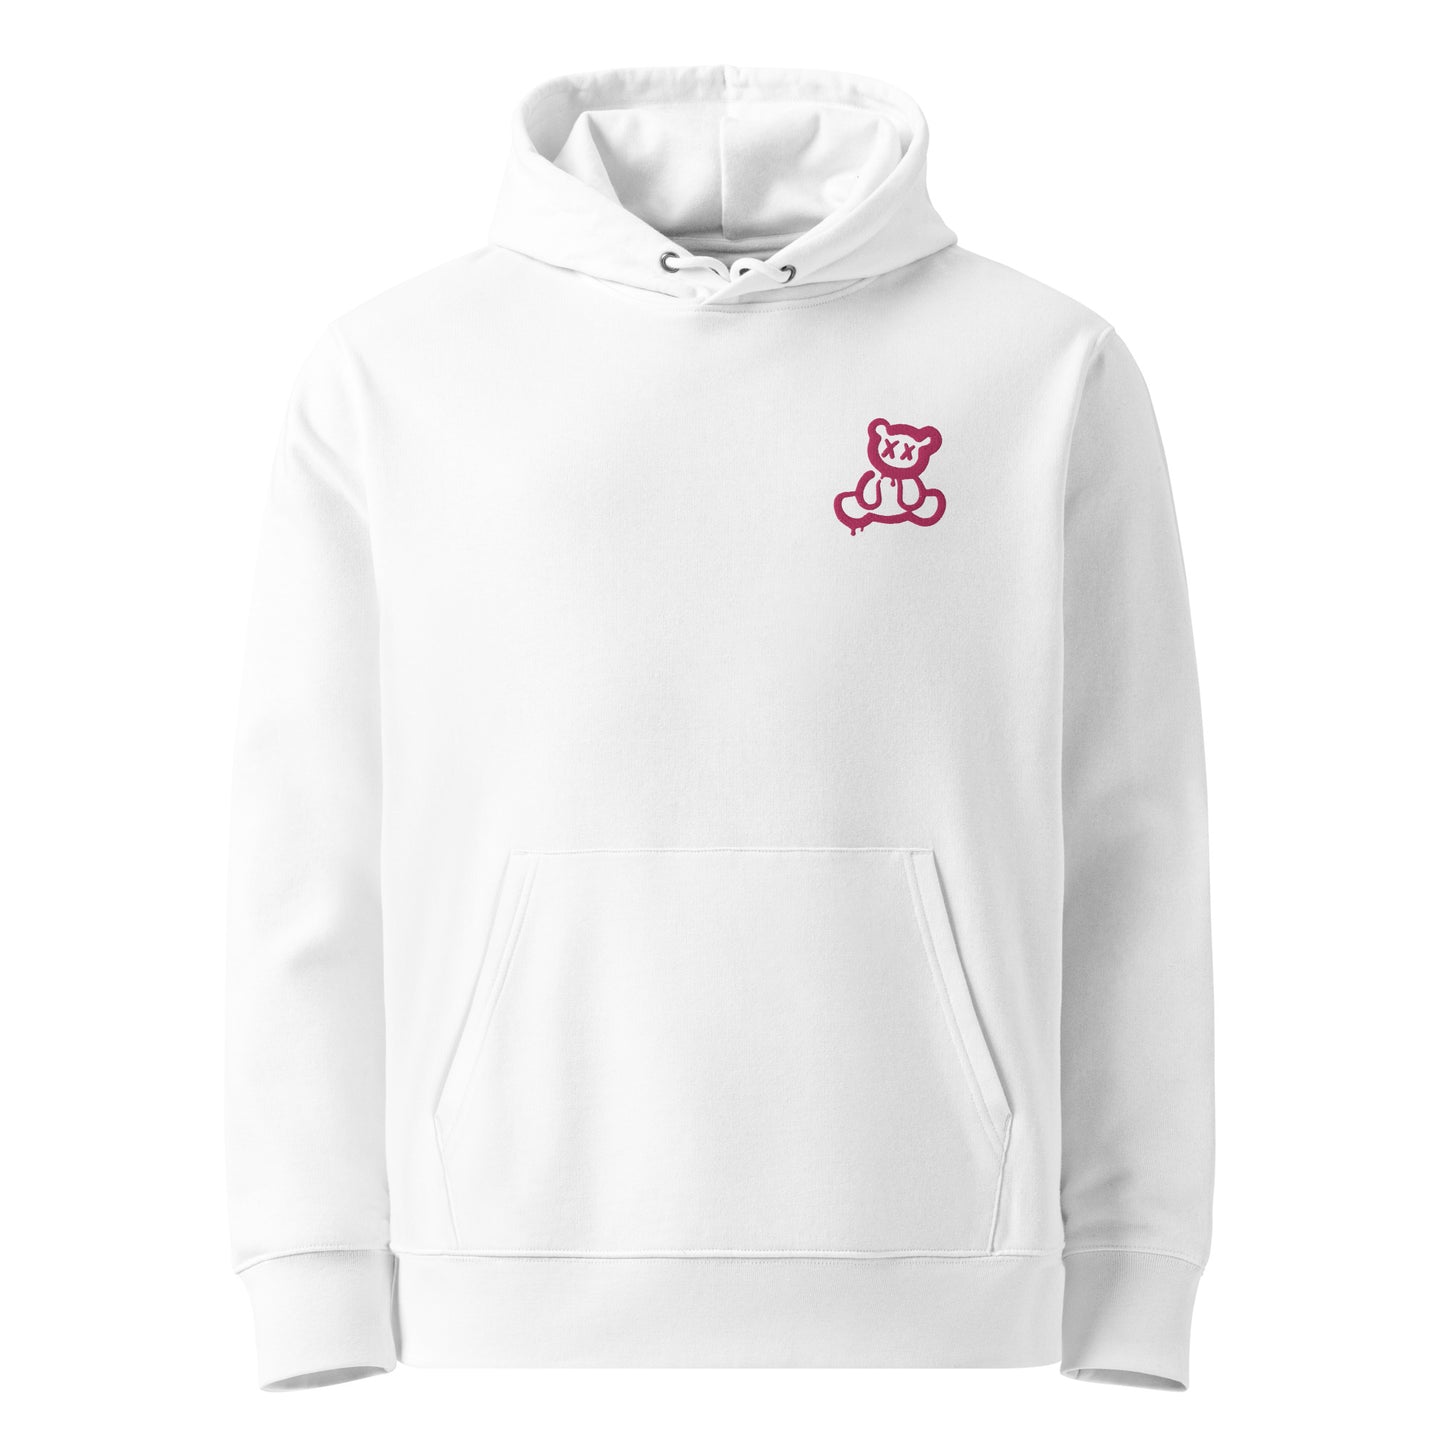 Unisex eco-friendly white hoodie featuring on the upper left chest; a subtle embroidered graffiti bear in hot pink, adding a touch of lgbtq to your outfit. sizes: small, medium, large, extra large, double extra large.